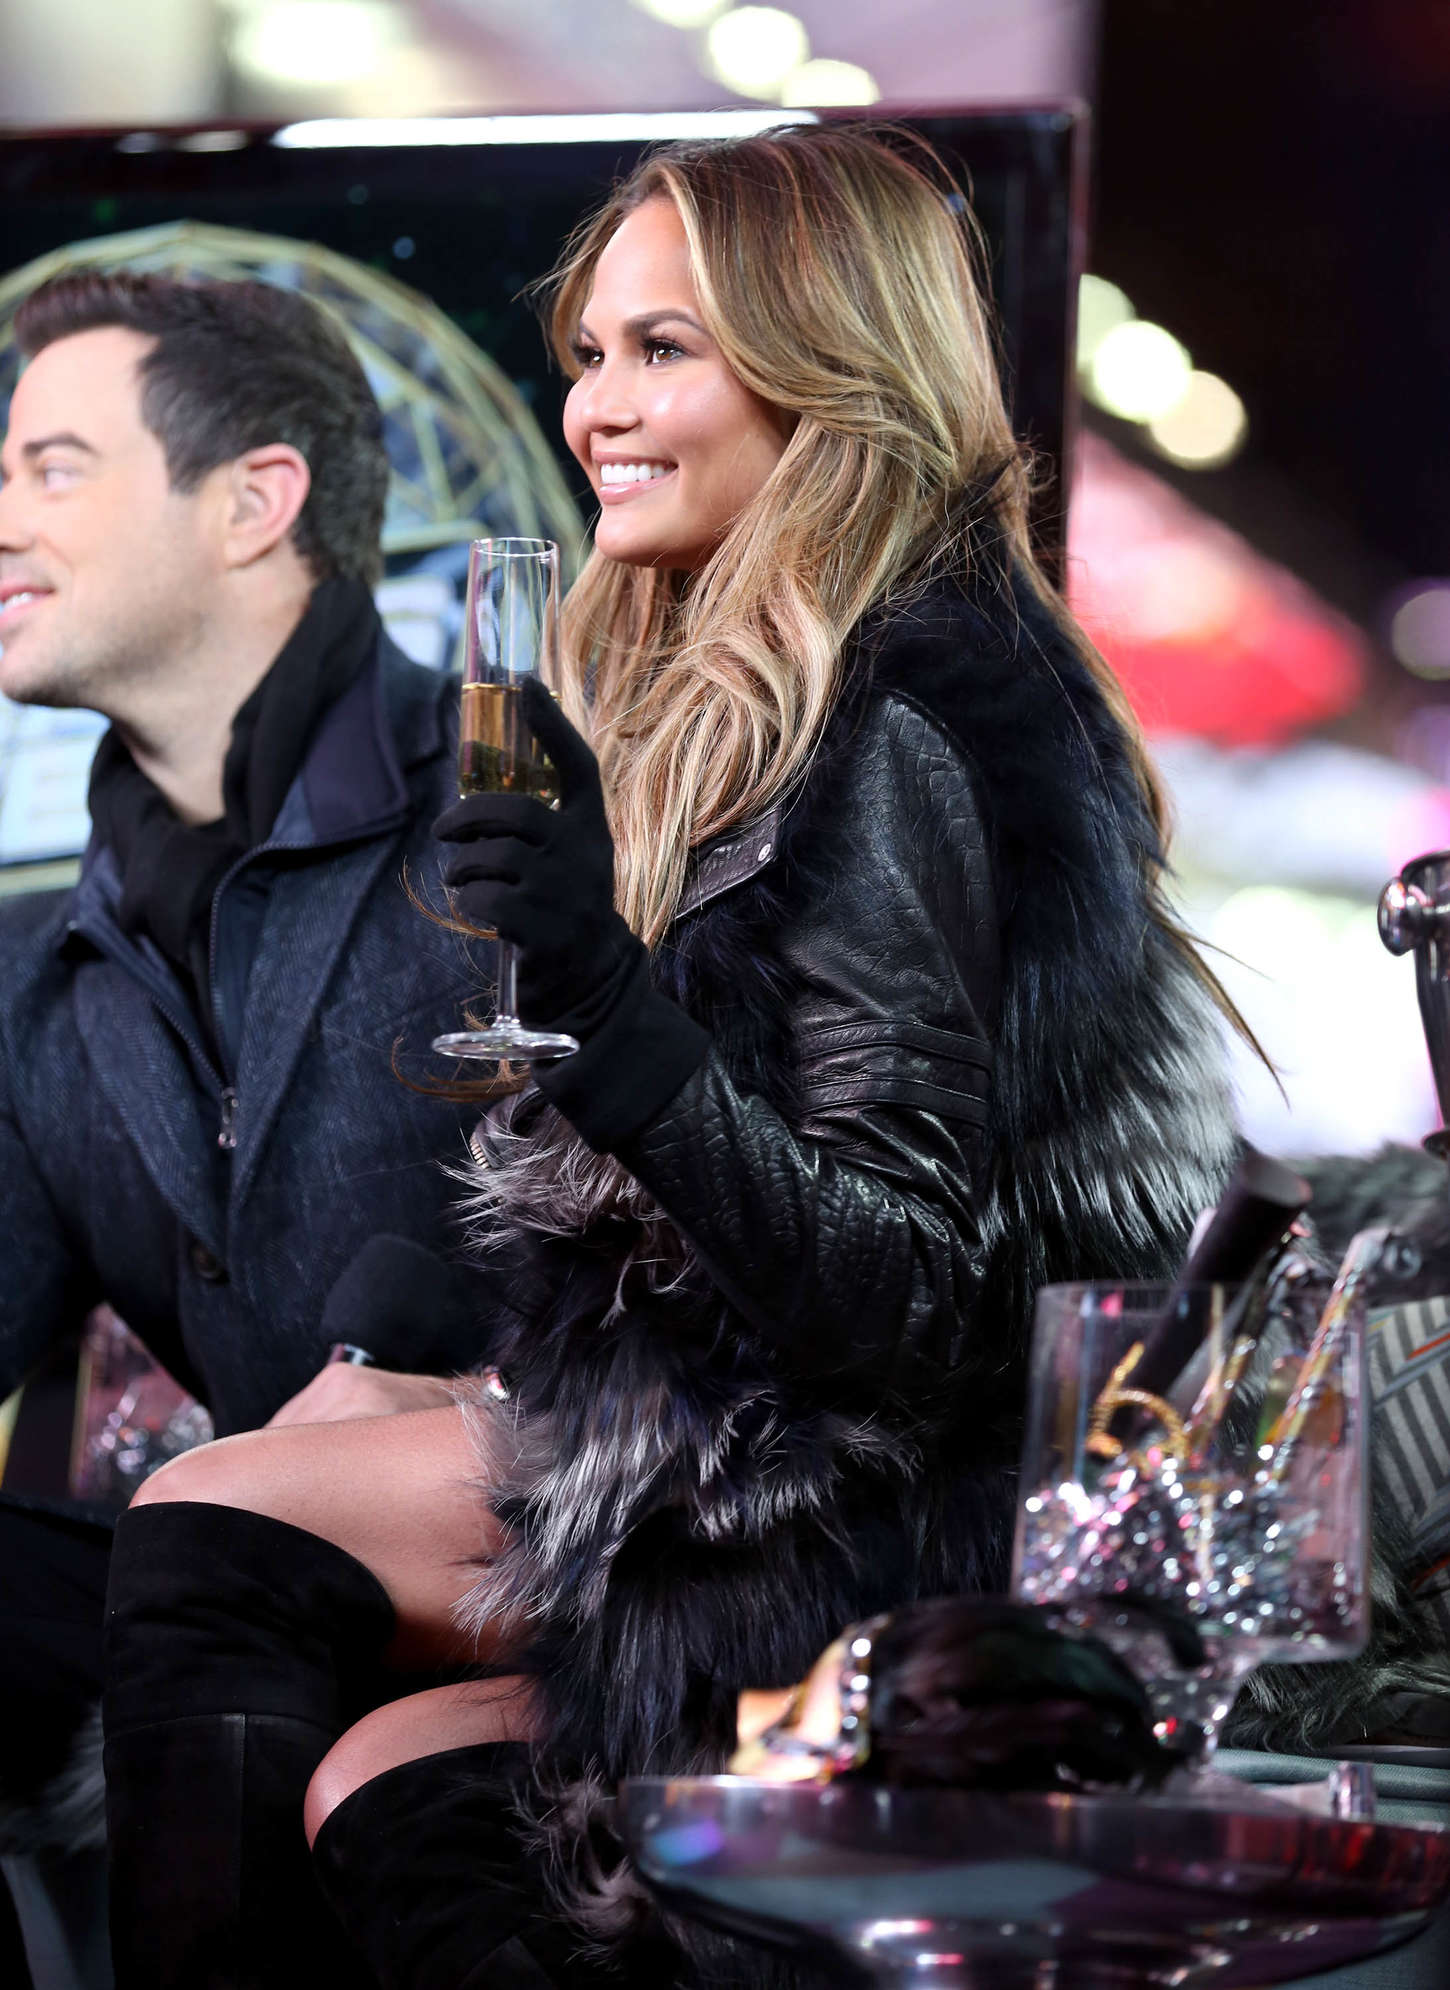 Chrissy Teigen attends New Year’s Eve at Times Square in NYC